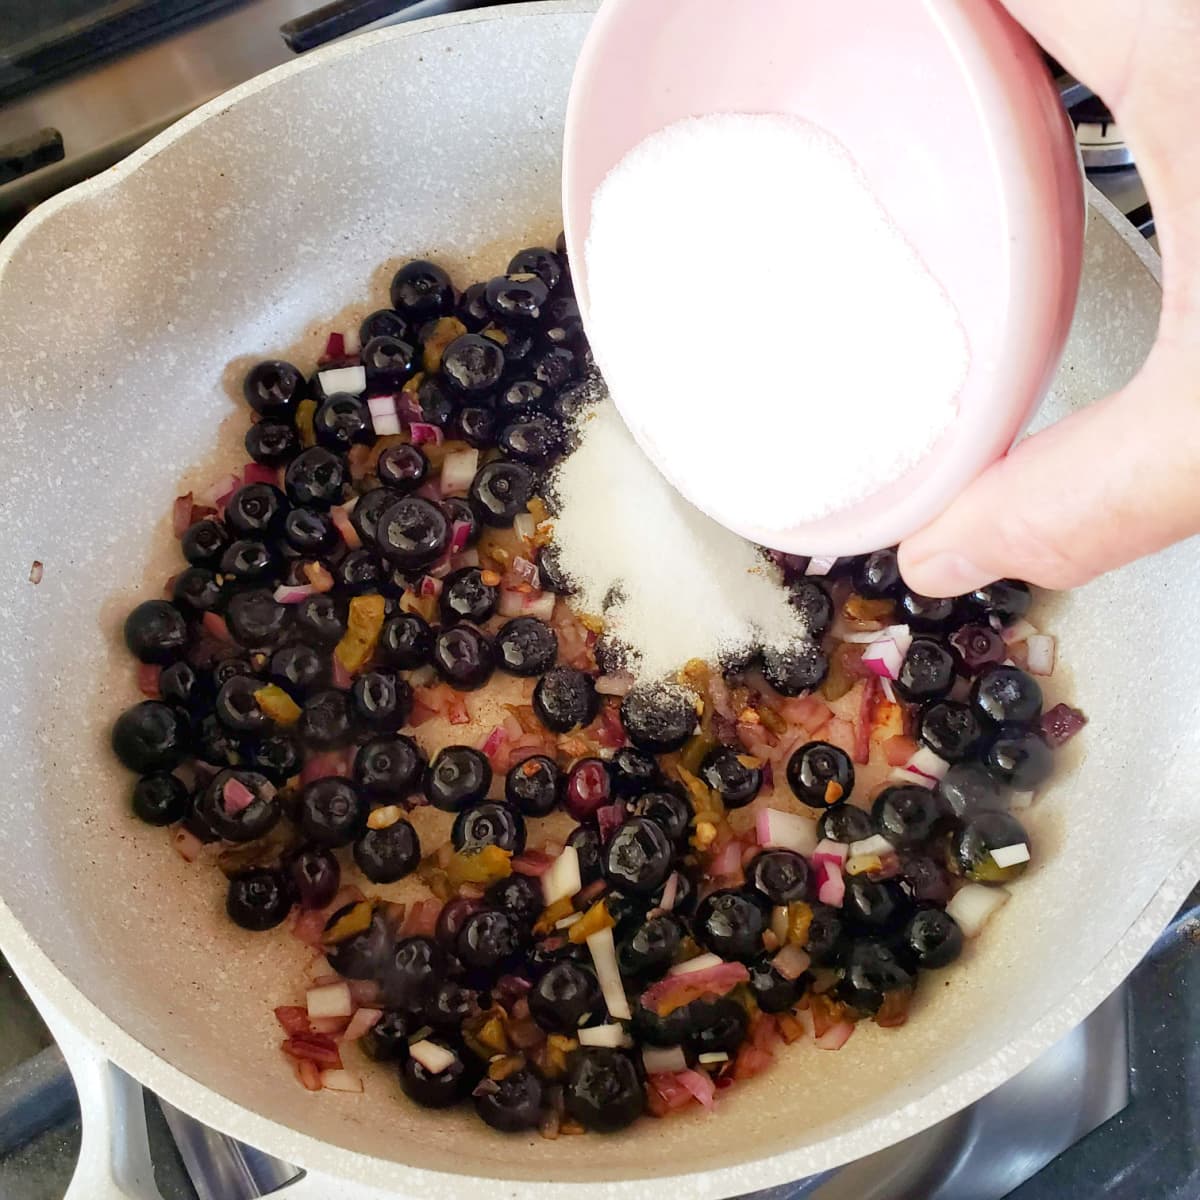 Hand holds small pink bowl pouring sugar into white skillet with blueberries